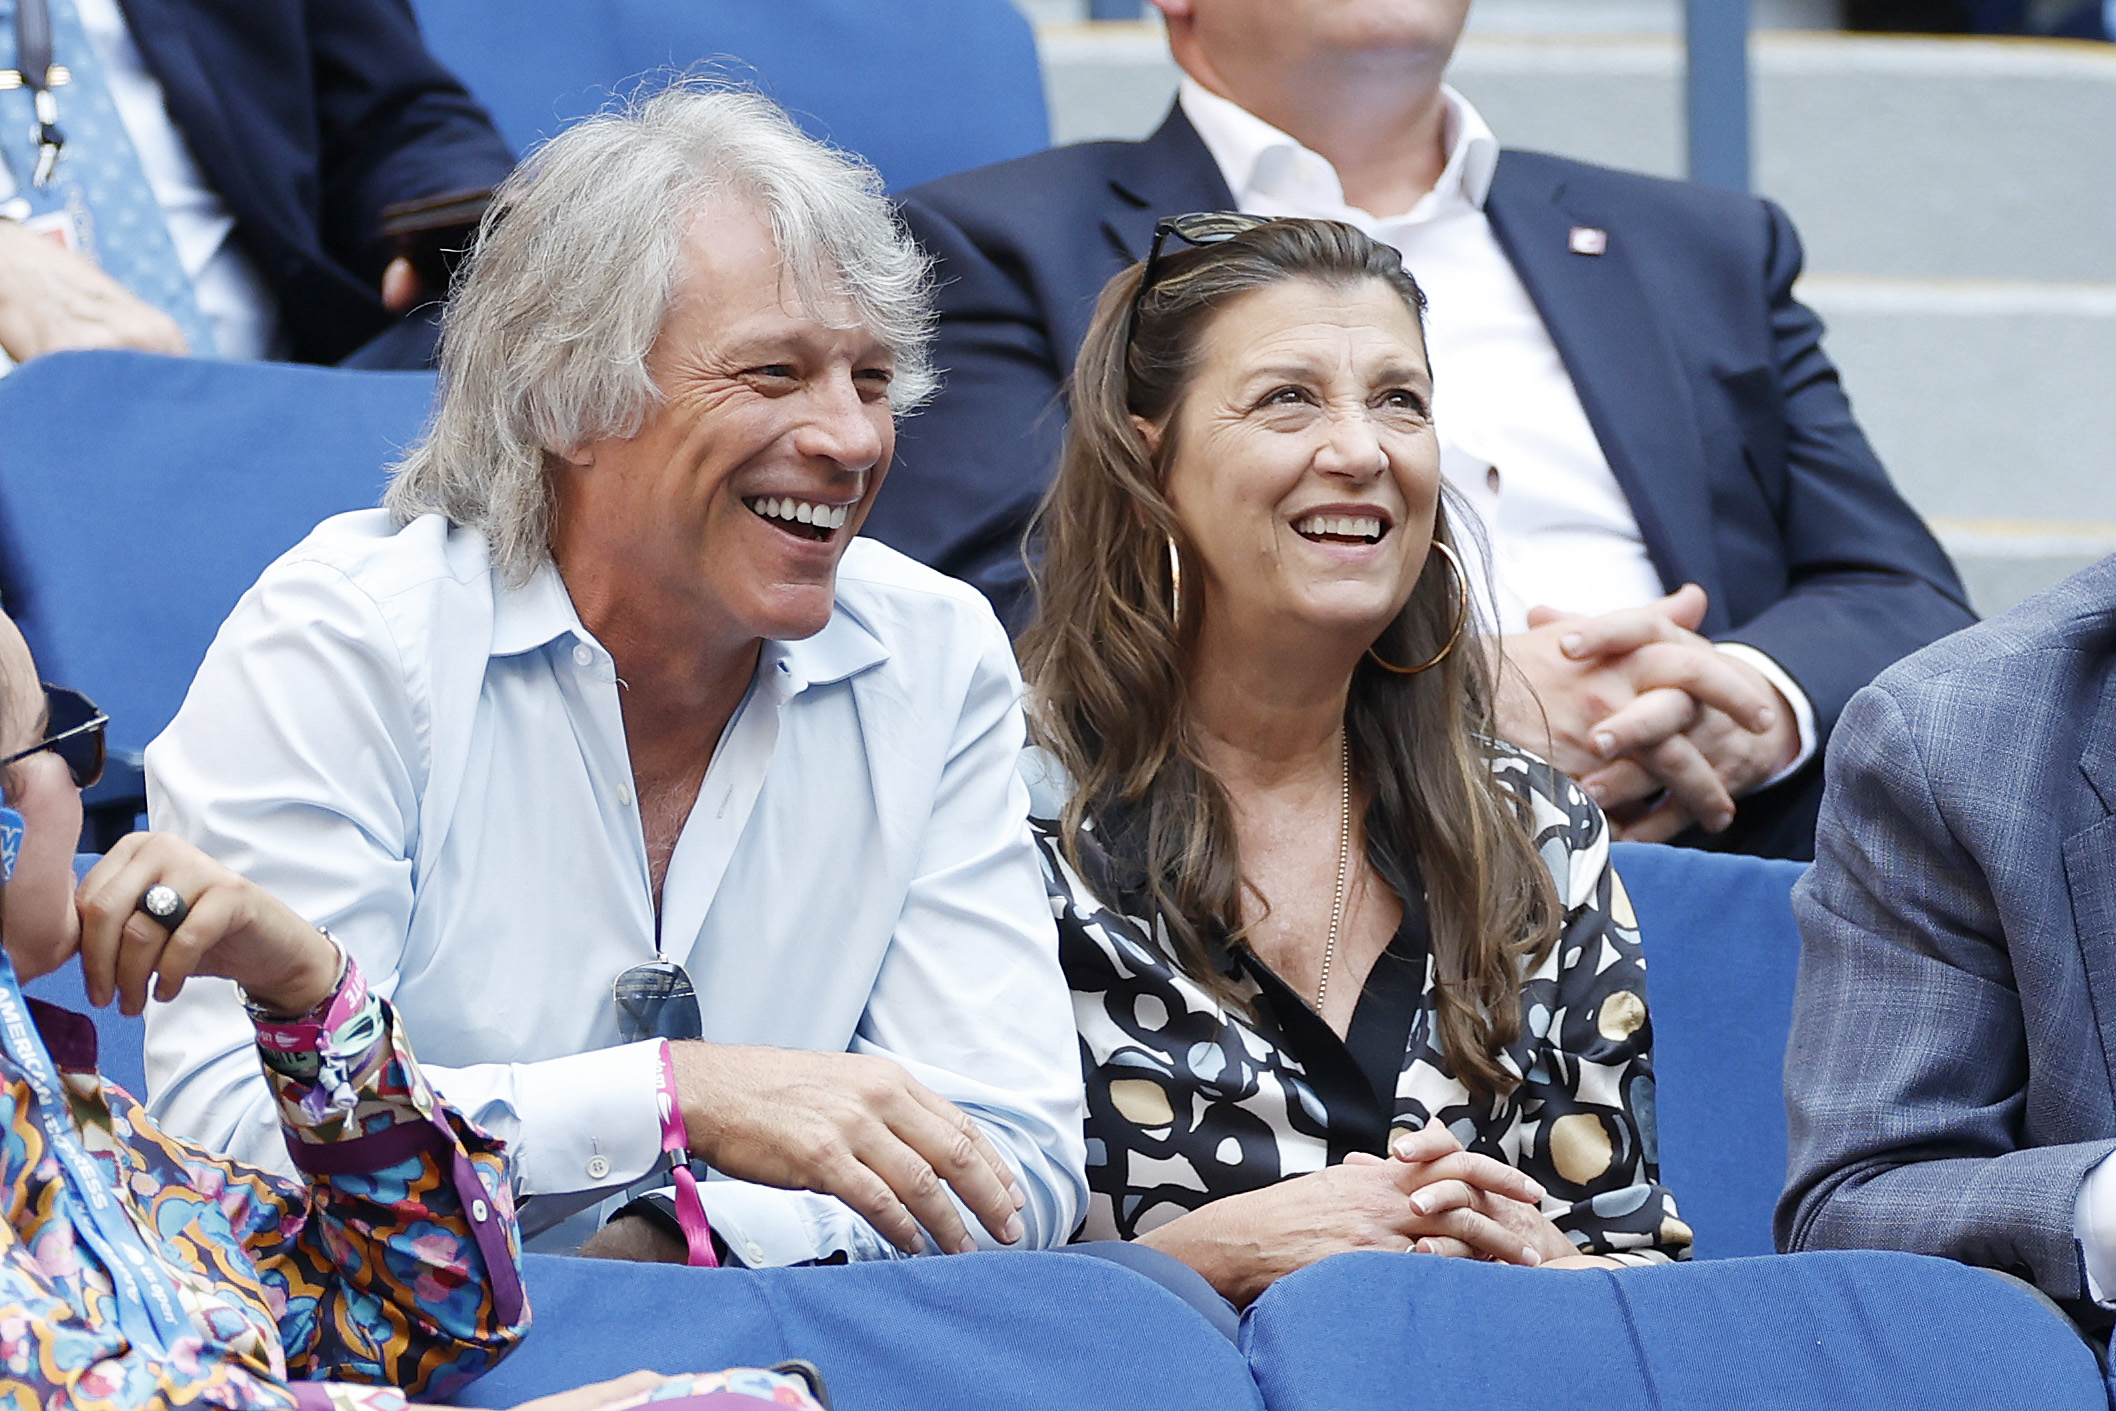 Jon Bon Jovi and Dorothea Hurley during the 2022 US Open at USTA Billie Jean King National Tennis Center on September 9, 2022. | Source: Getty Images